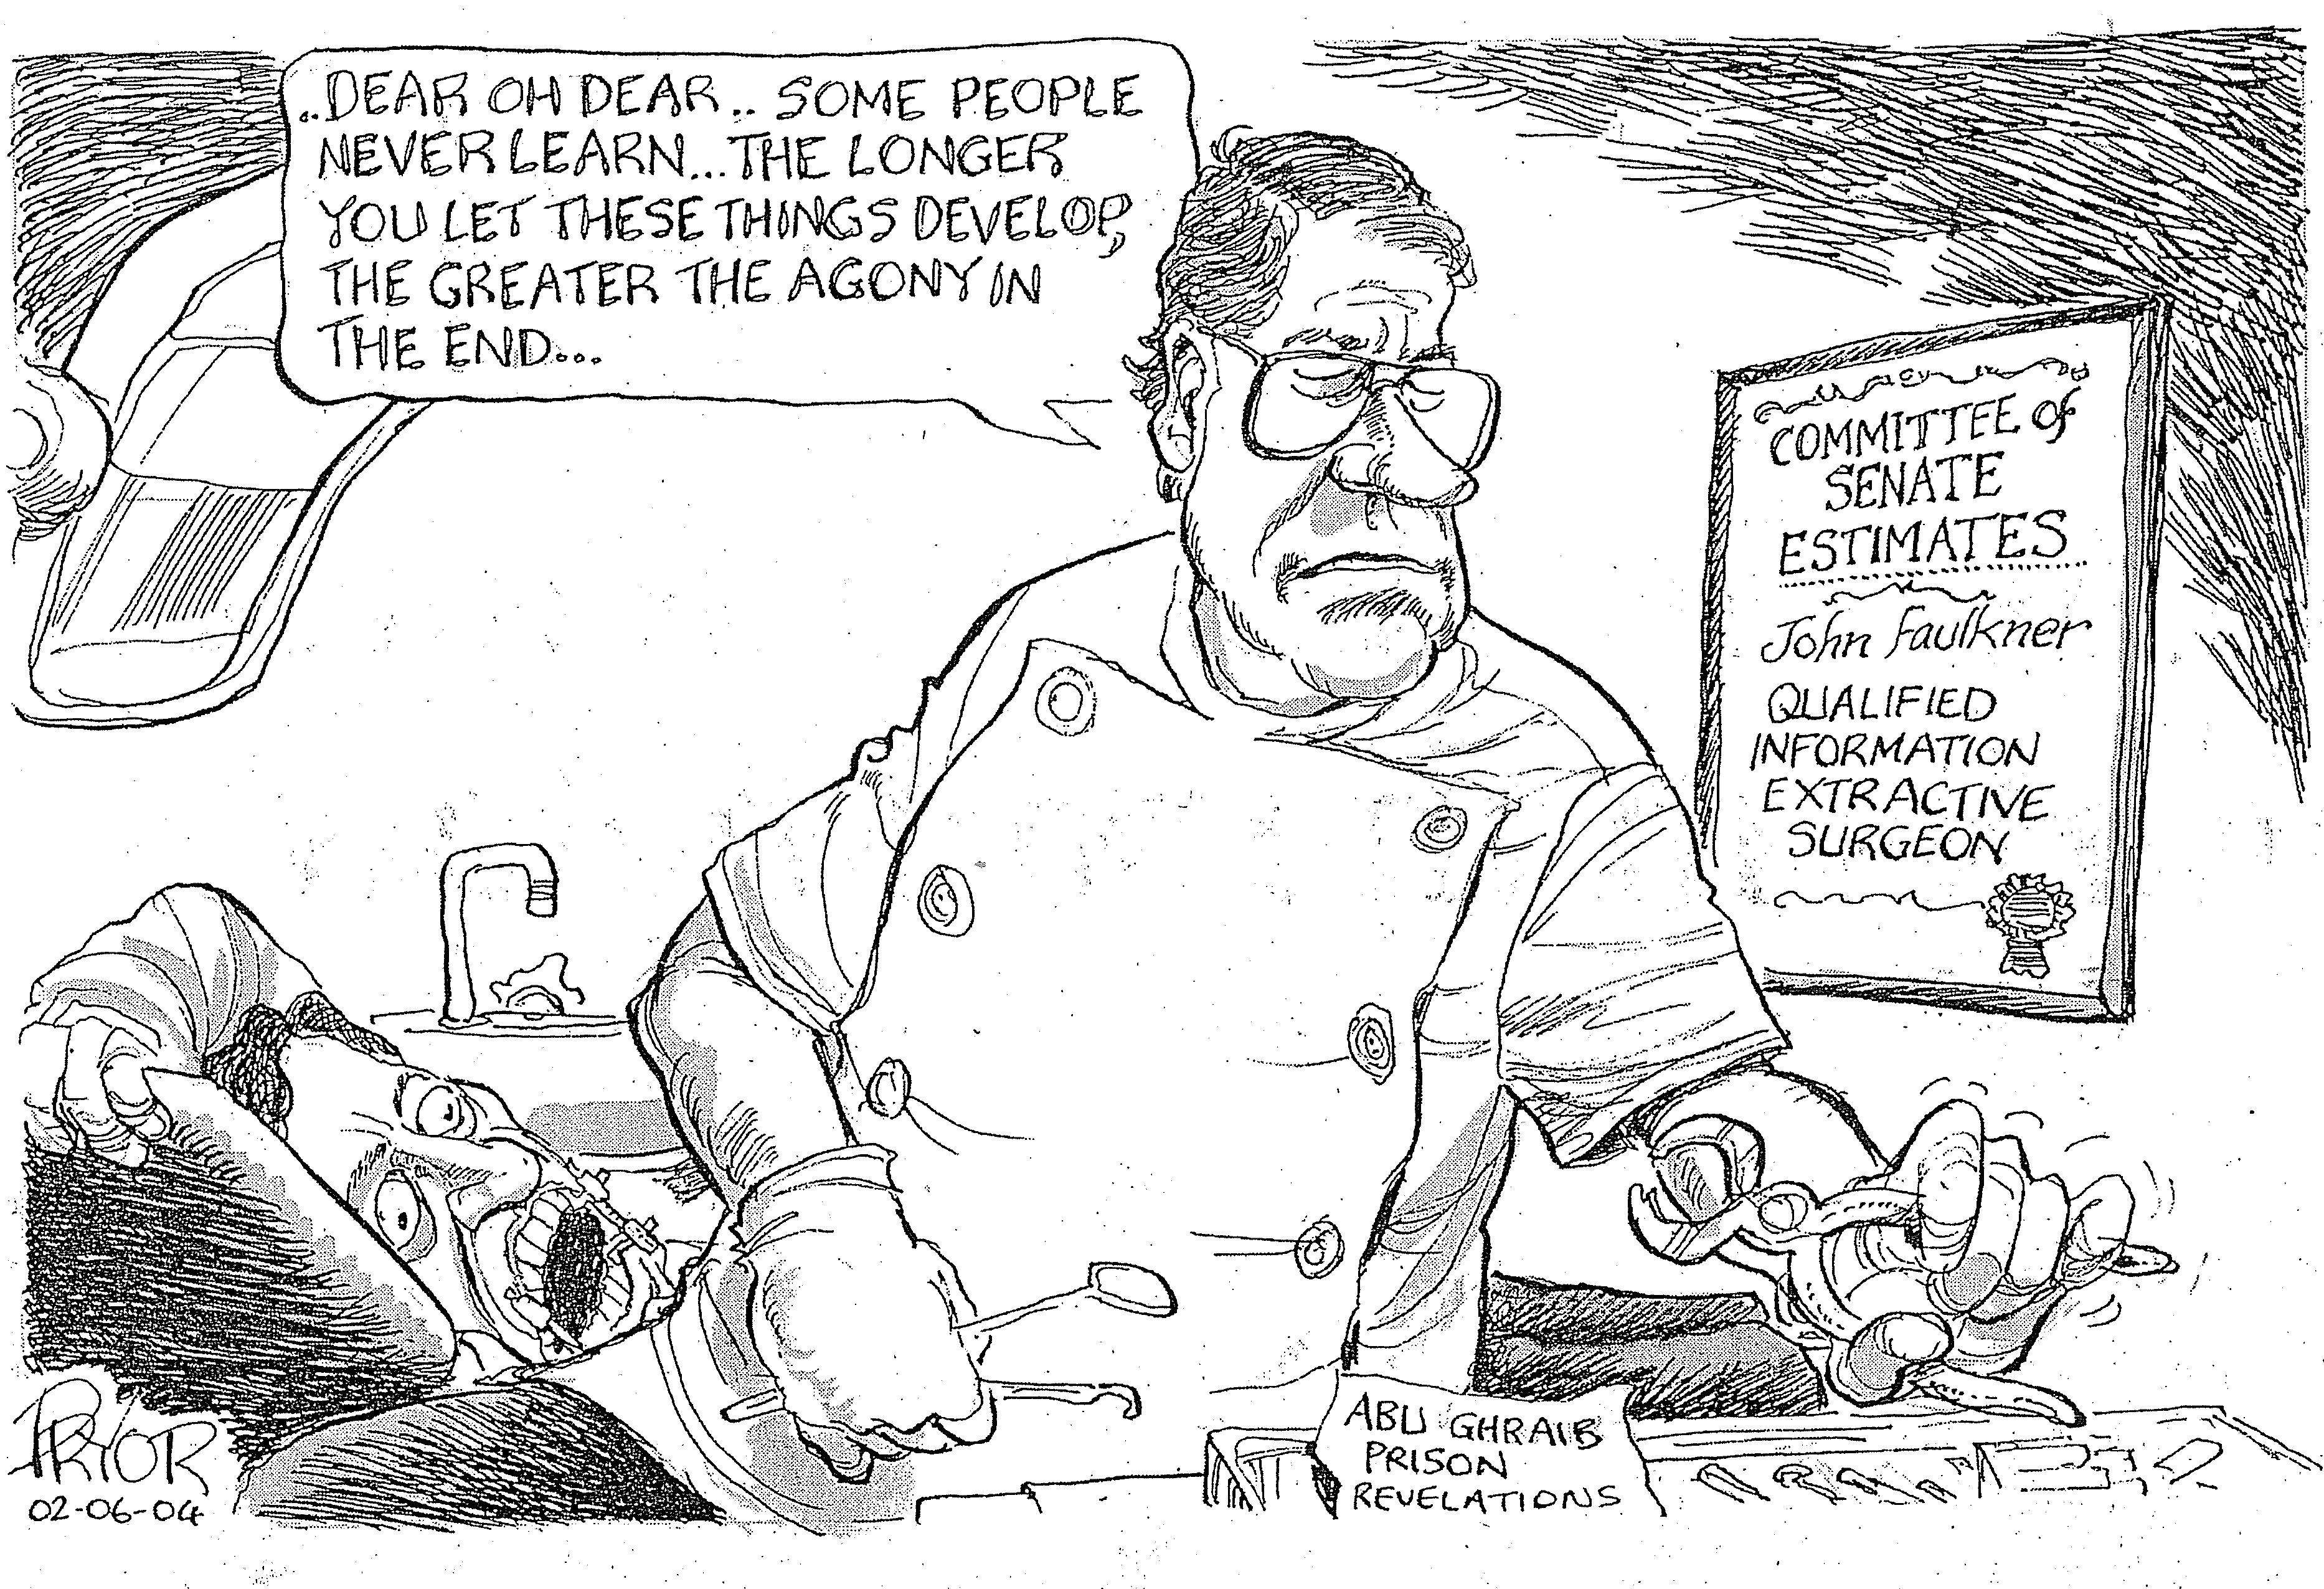 Cartoon—Geoff Pryor, 'Dear oh dear…some people never learn...', Canberra Times, 2 June 2004. Cartoon in response to the Foreign Affairs Defence and Trade Legislation Committee examination of the role of Australian personnel in operational decisions in Iraqi prisons.